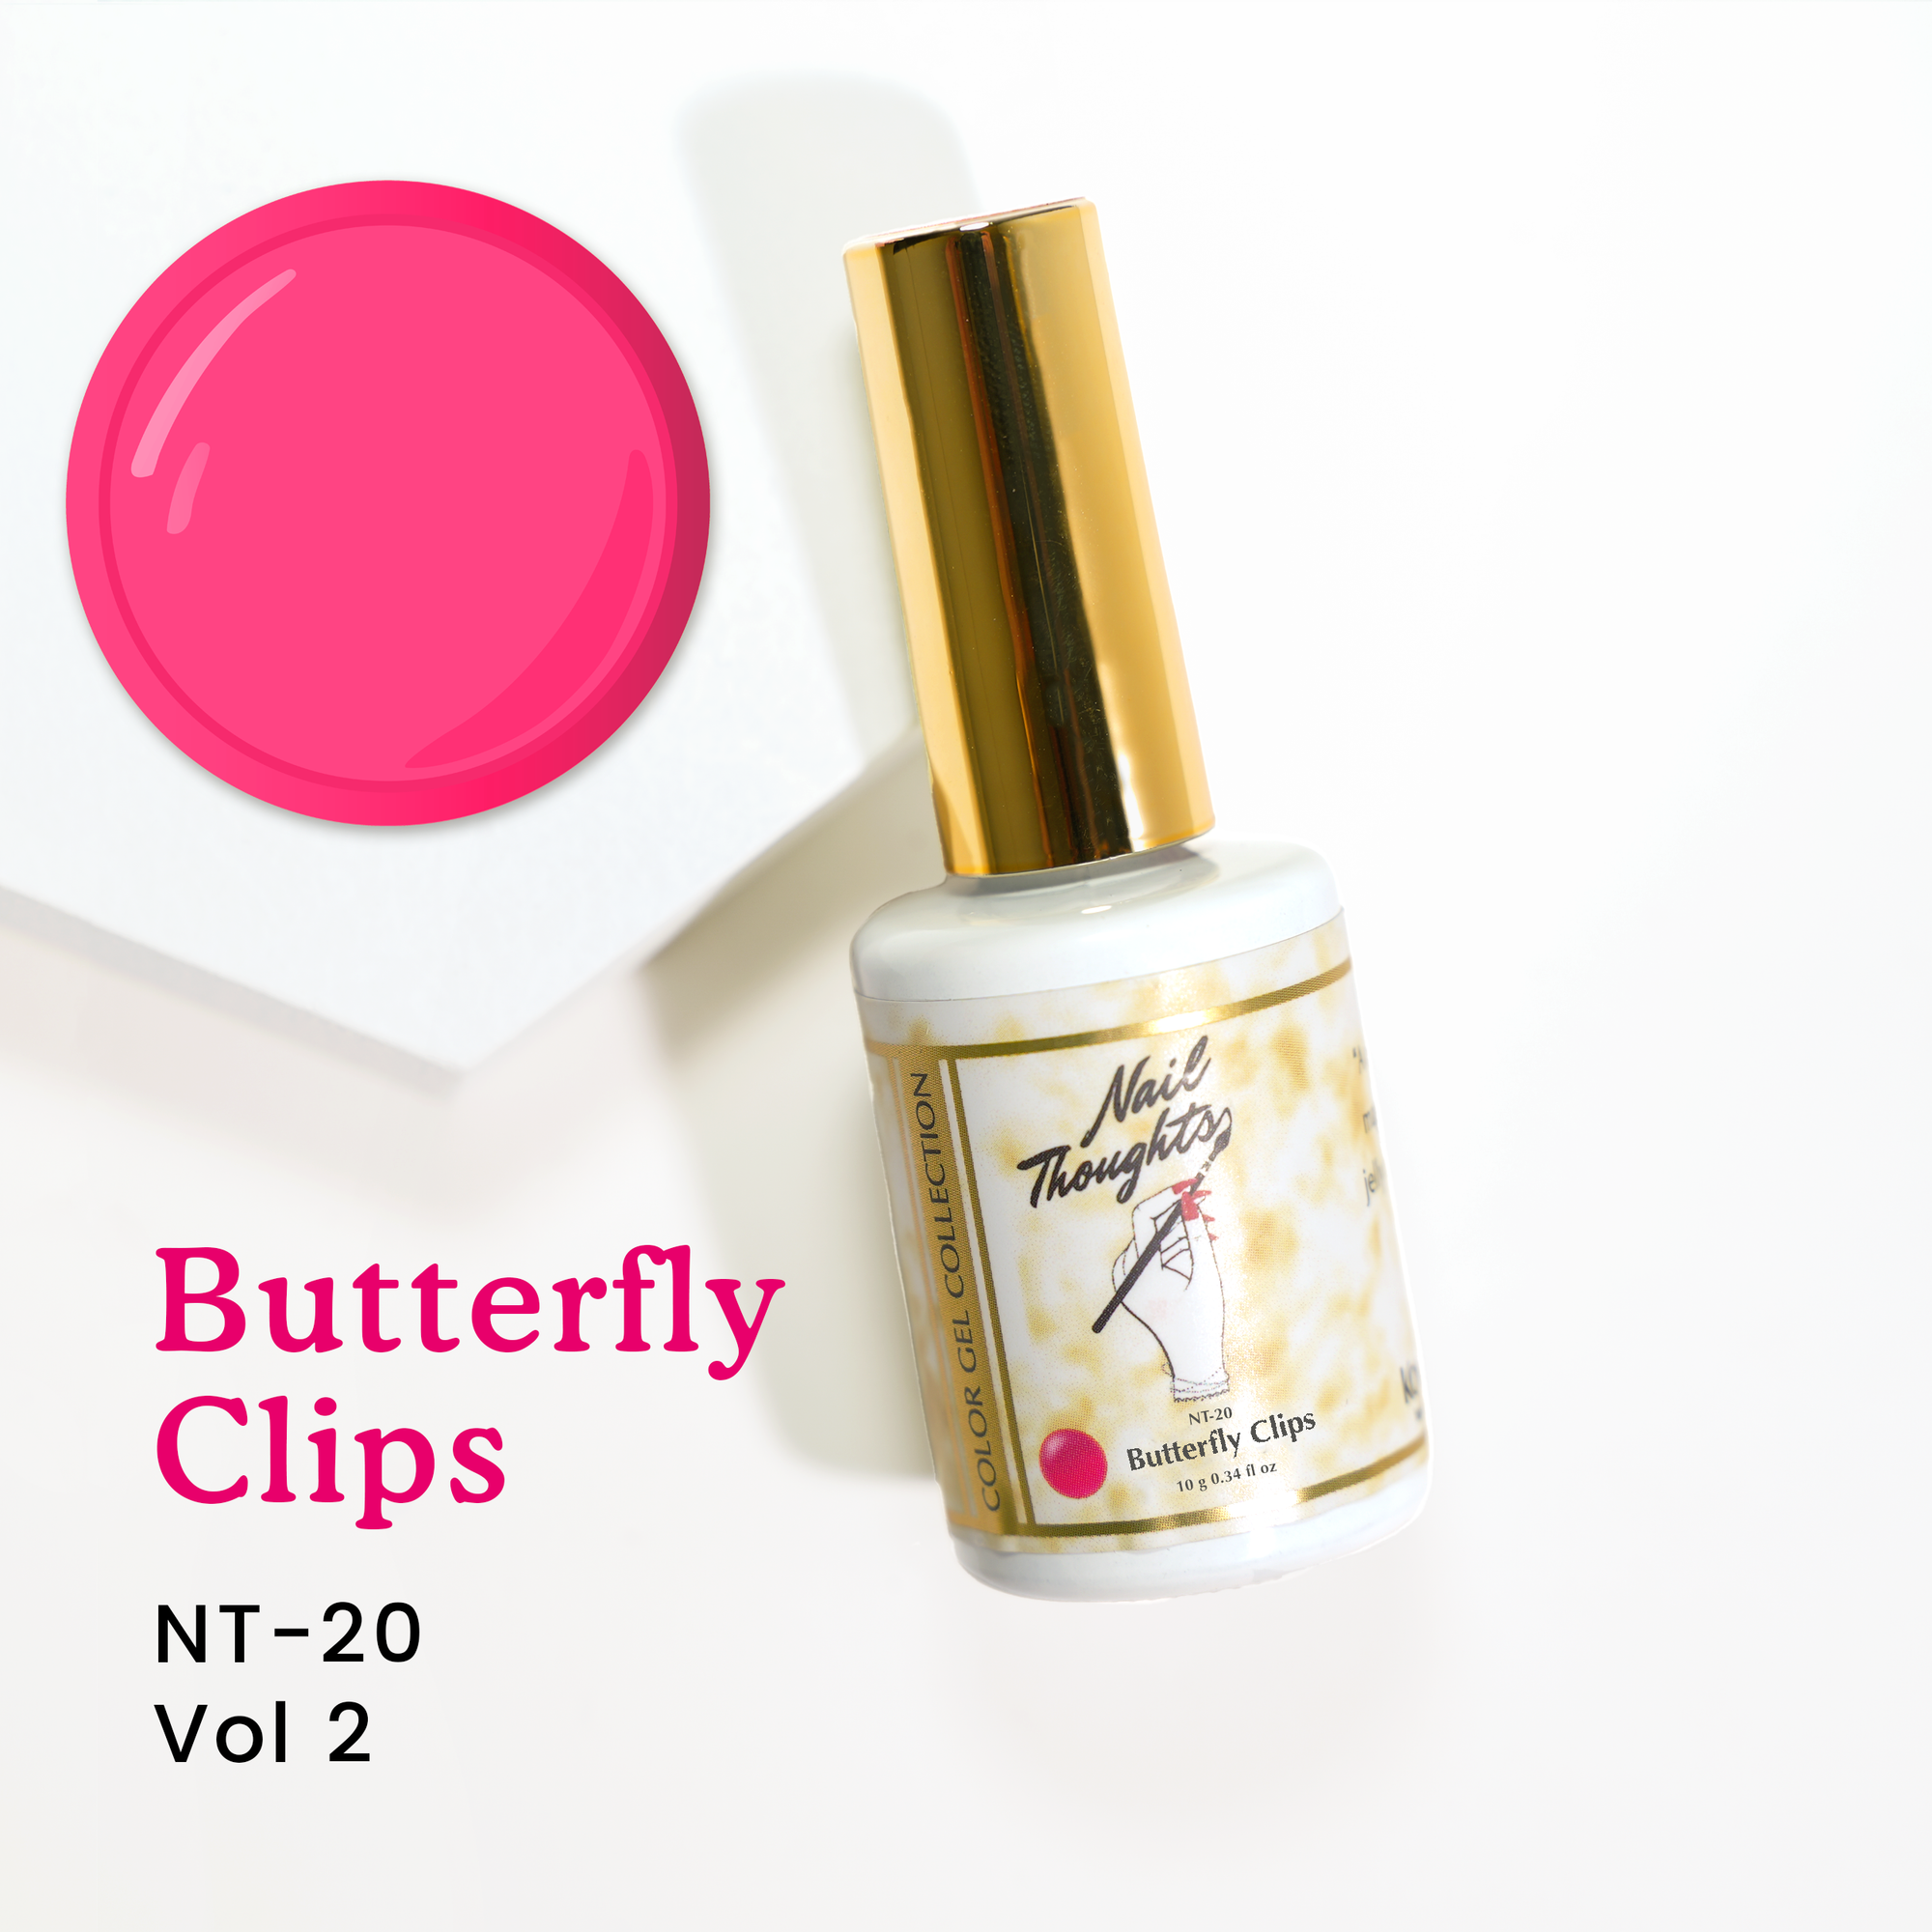 Butterfly Clips NT-20